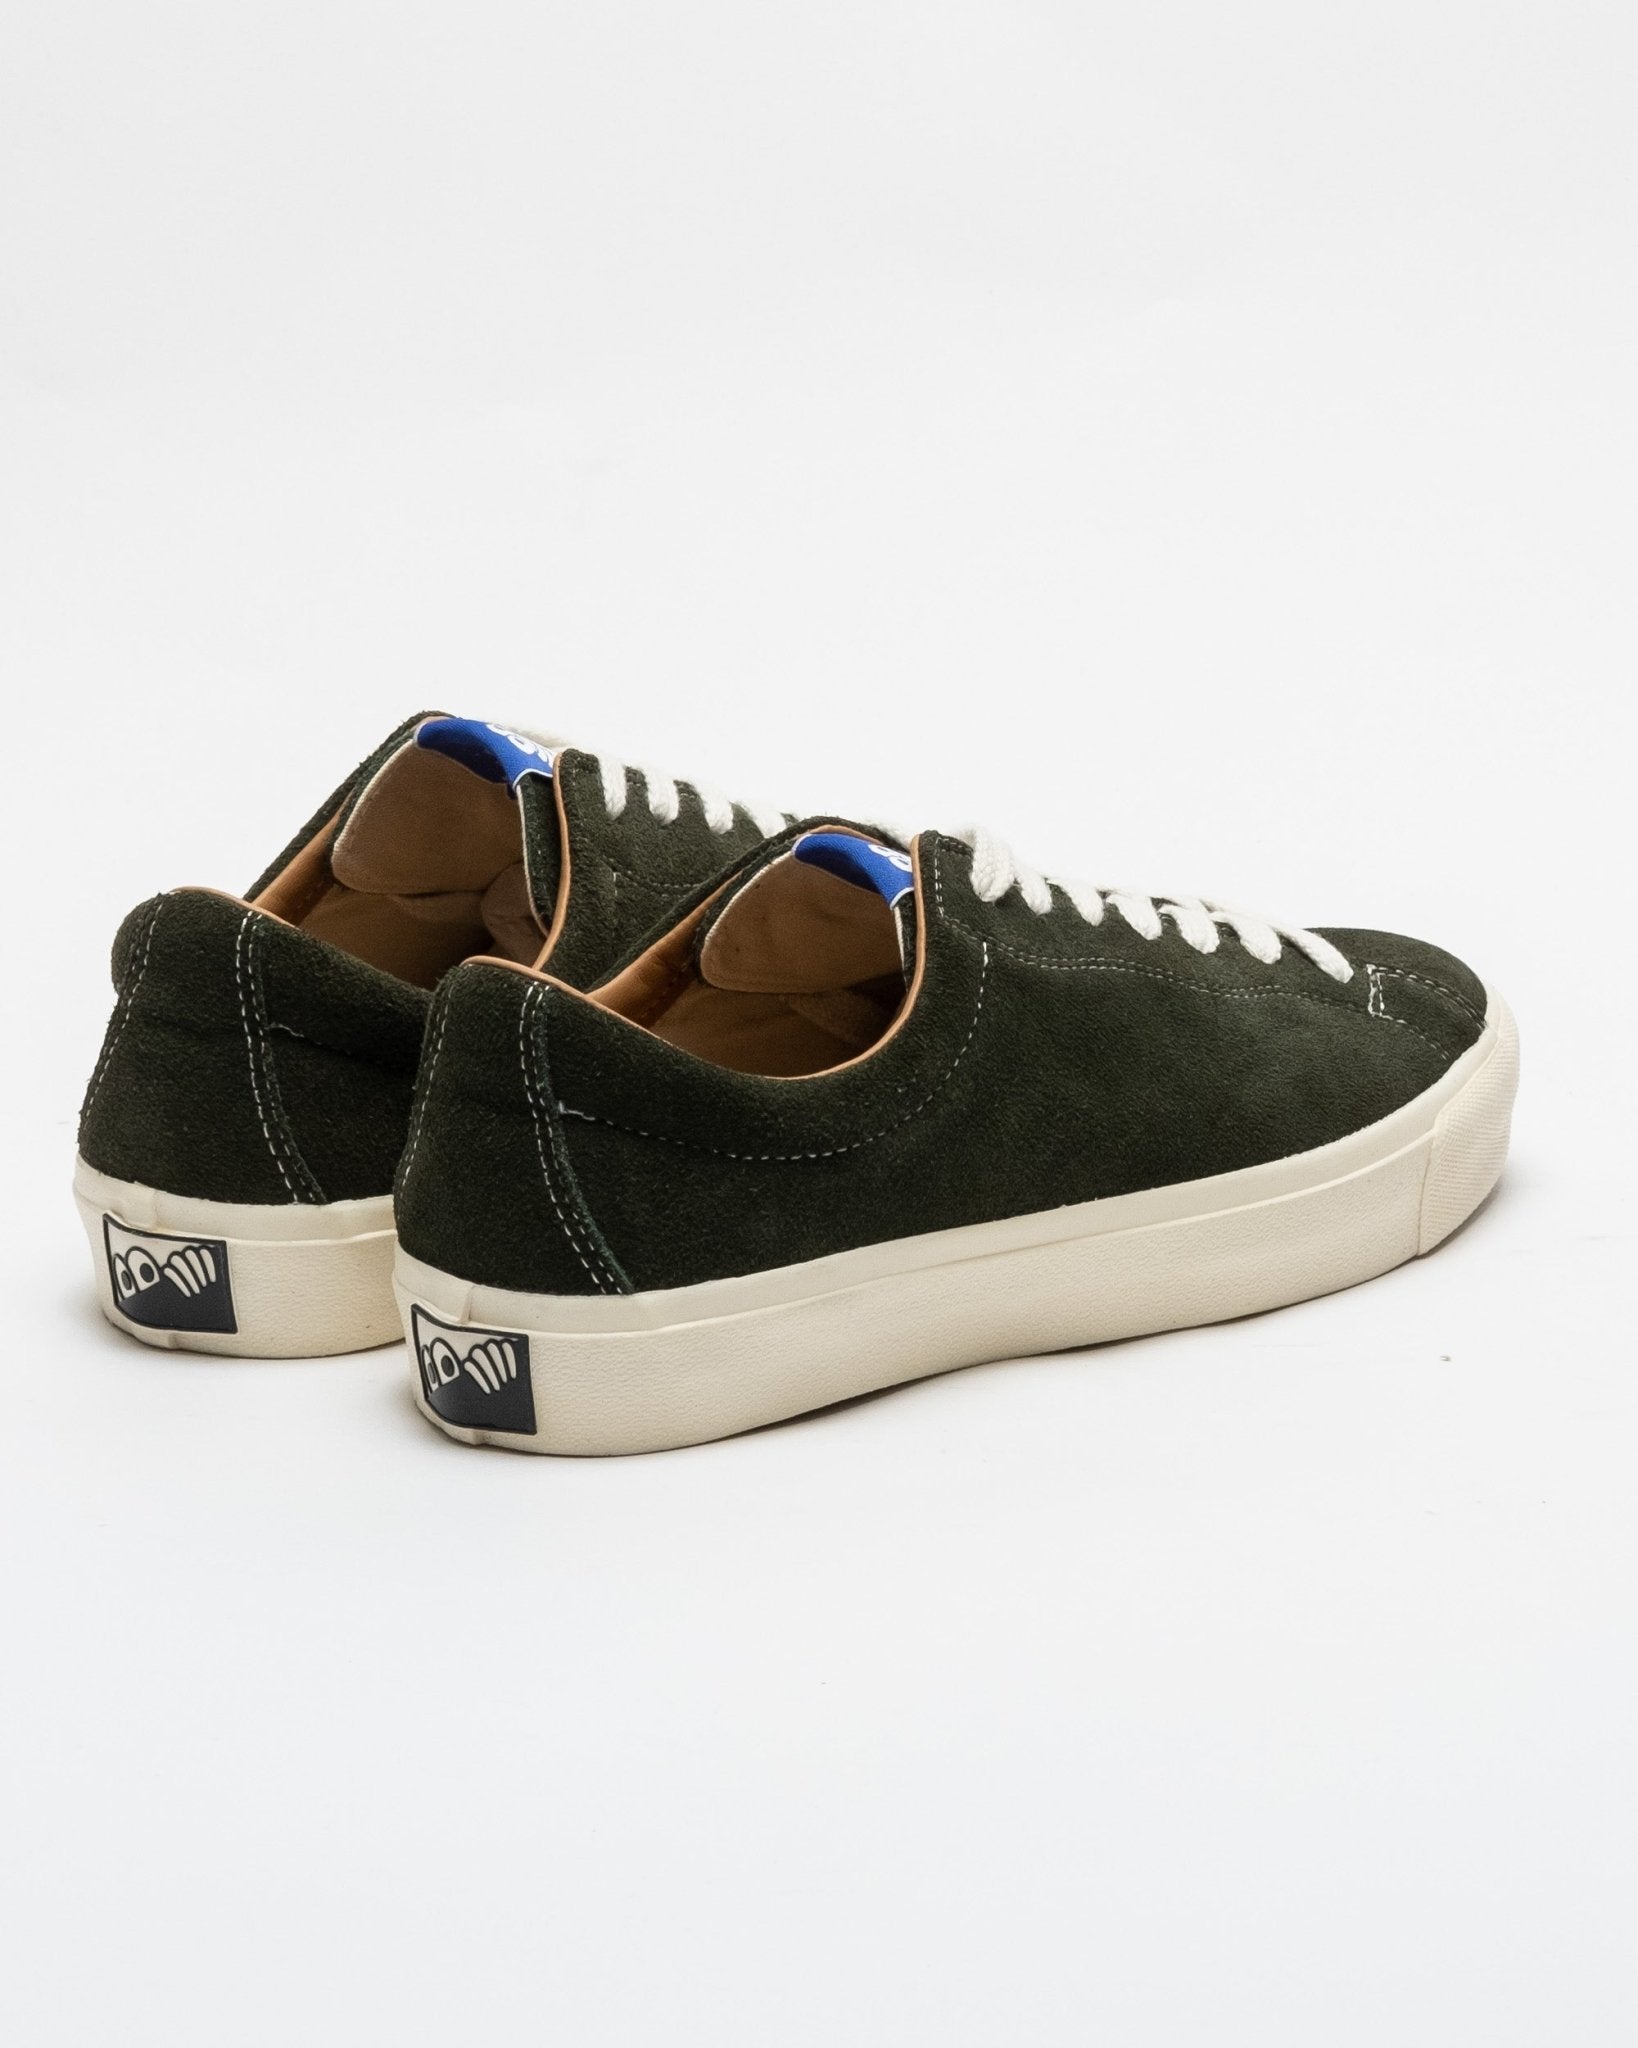 VM003 Suede LO Olive/White - Meadow